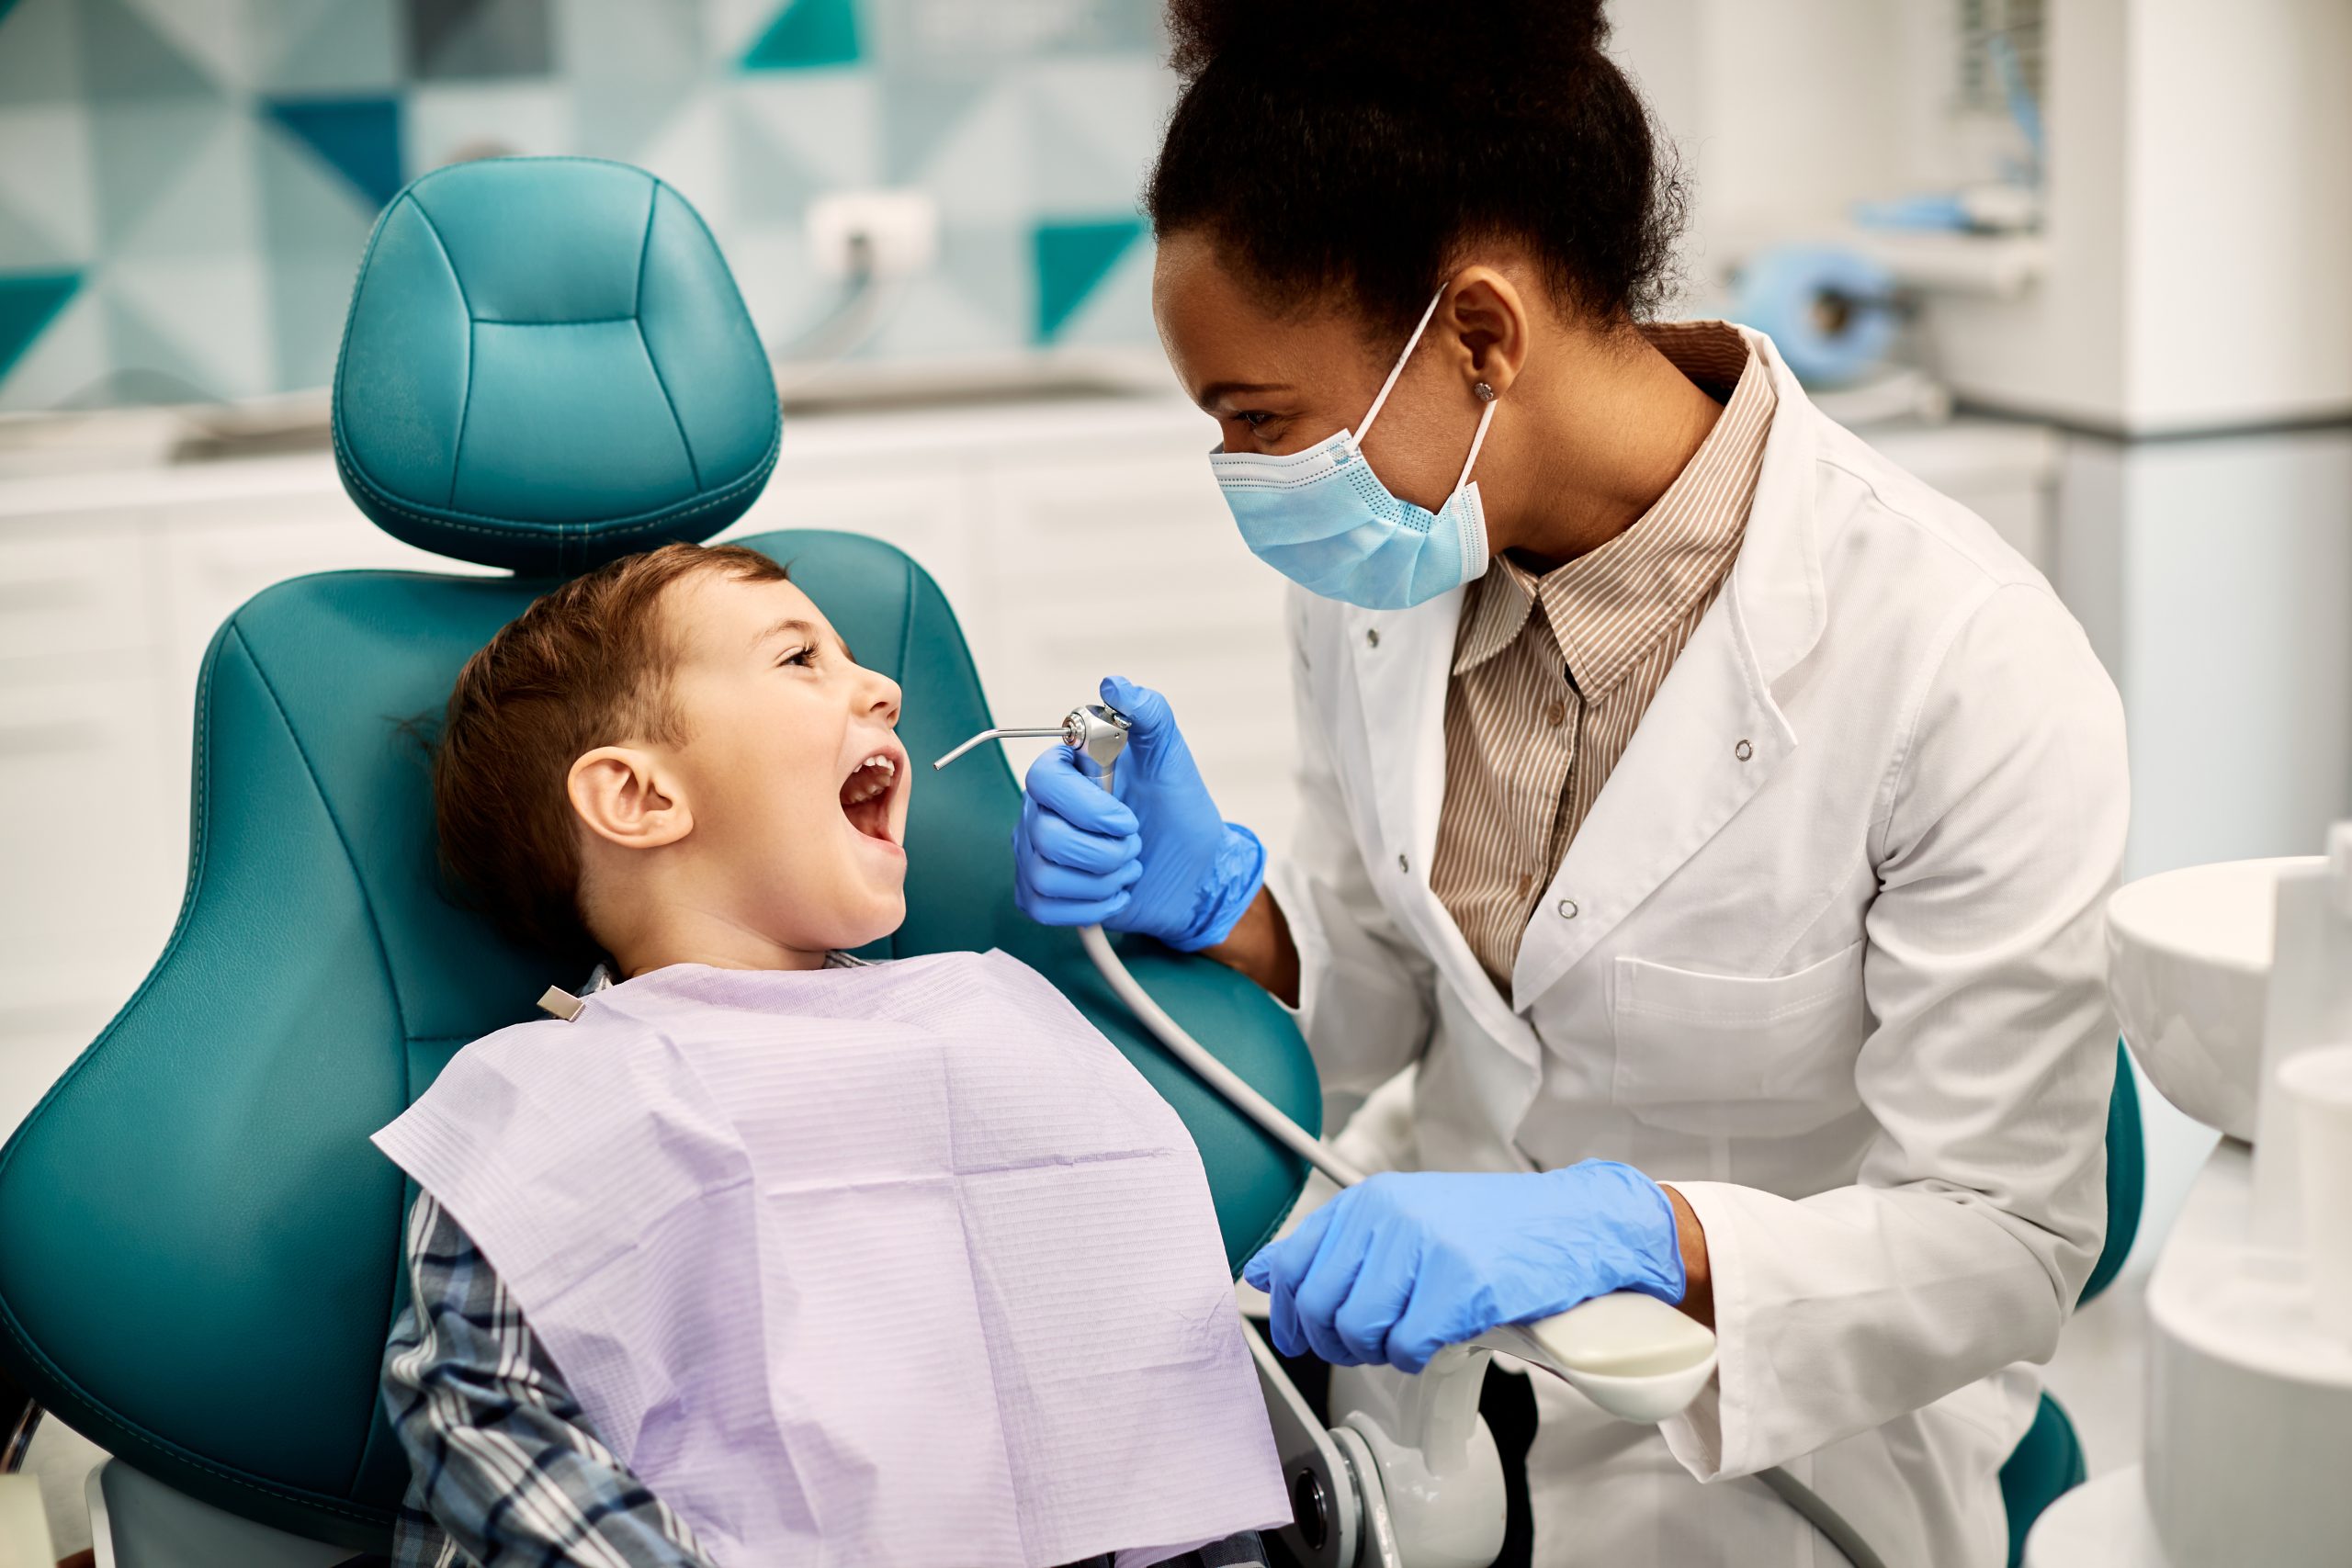 What is a Dental Hygienist’s Role? How They Assist in Oral Health Care